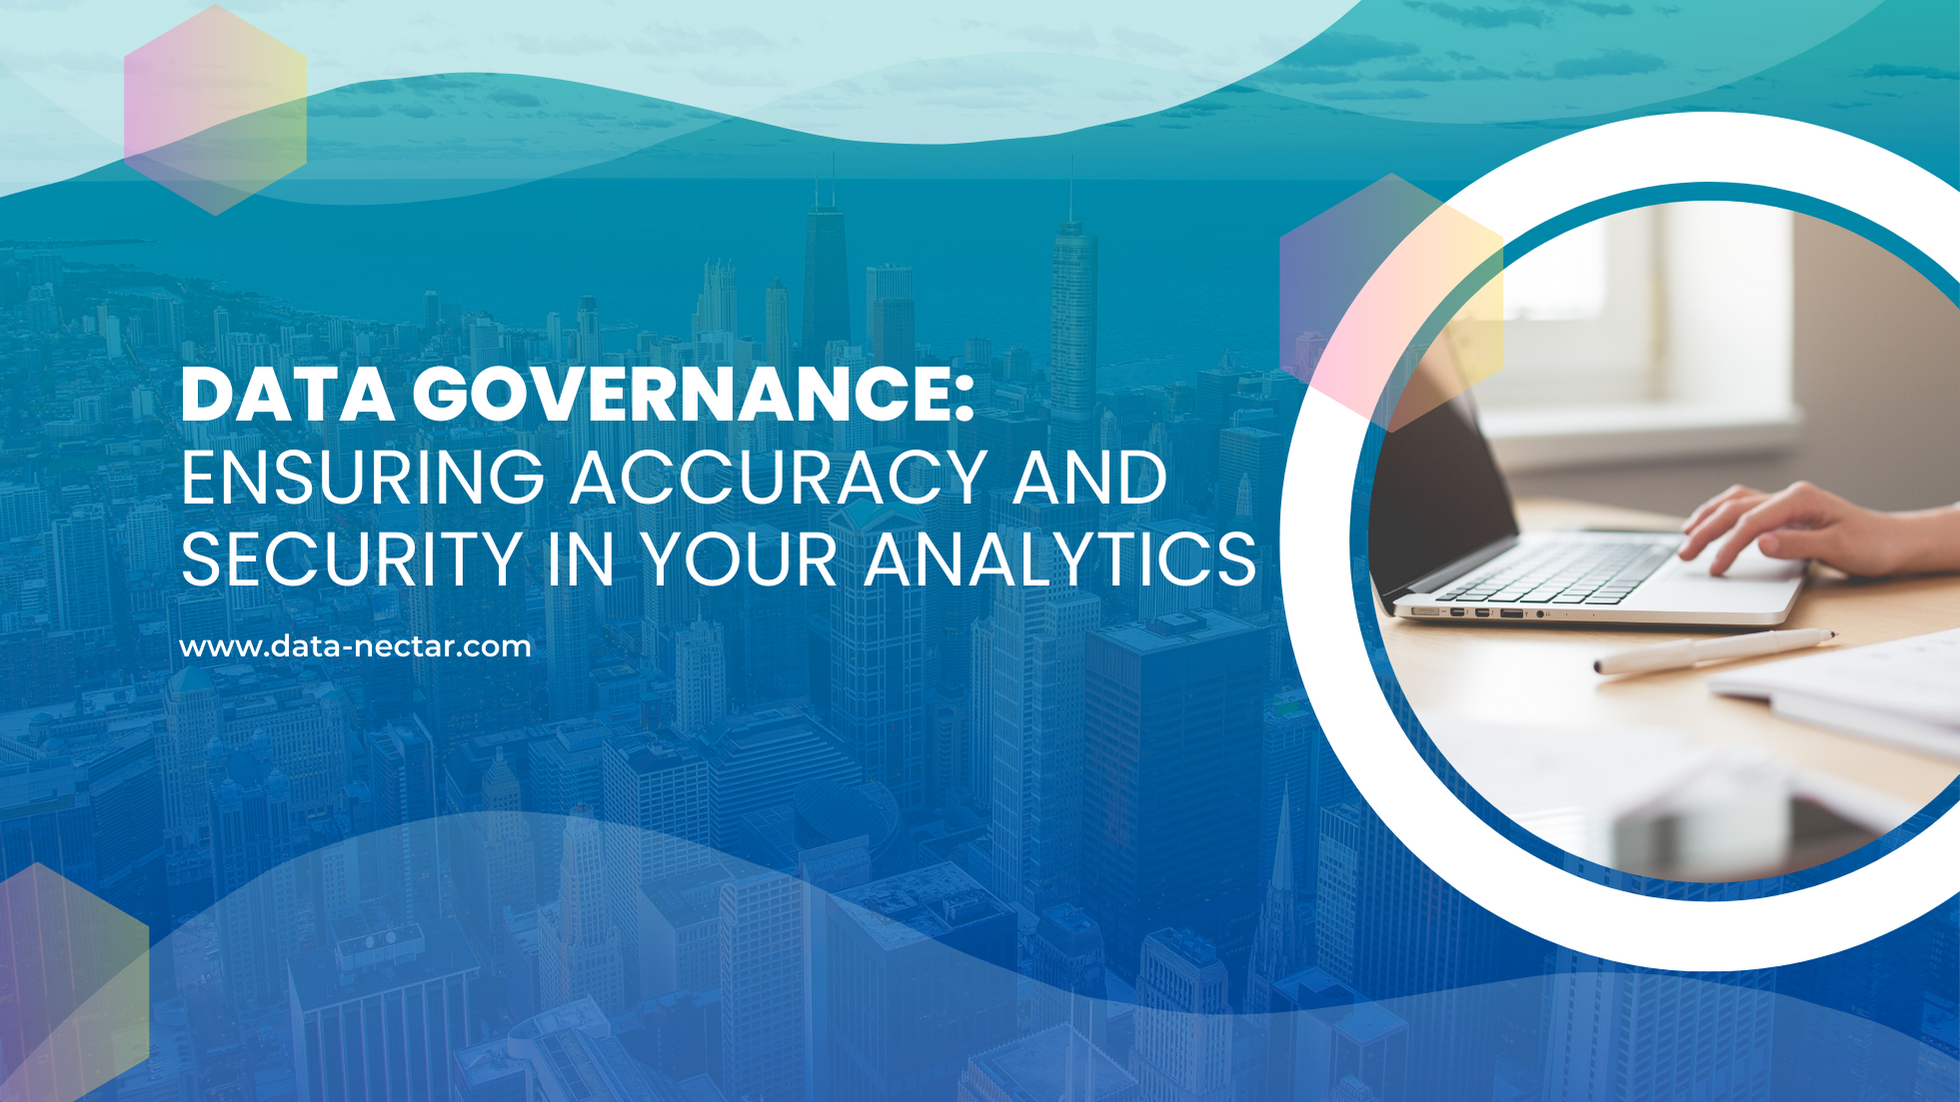 Data Governance: Ensuring Accuracy and Security in Your Analytics